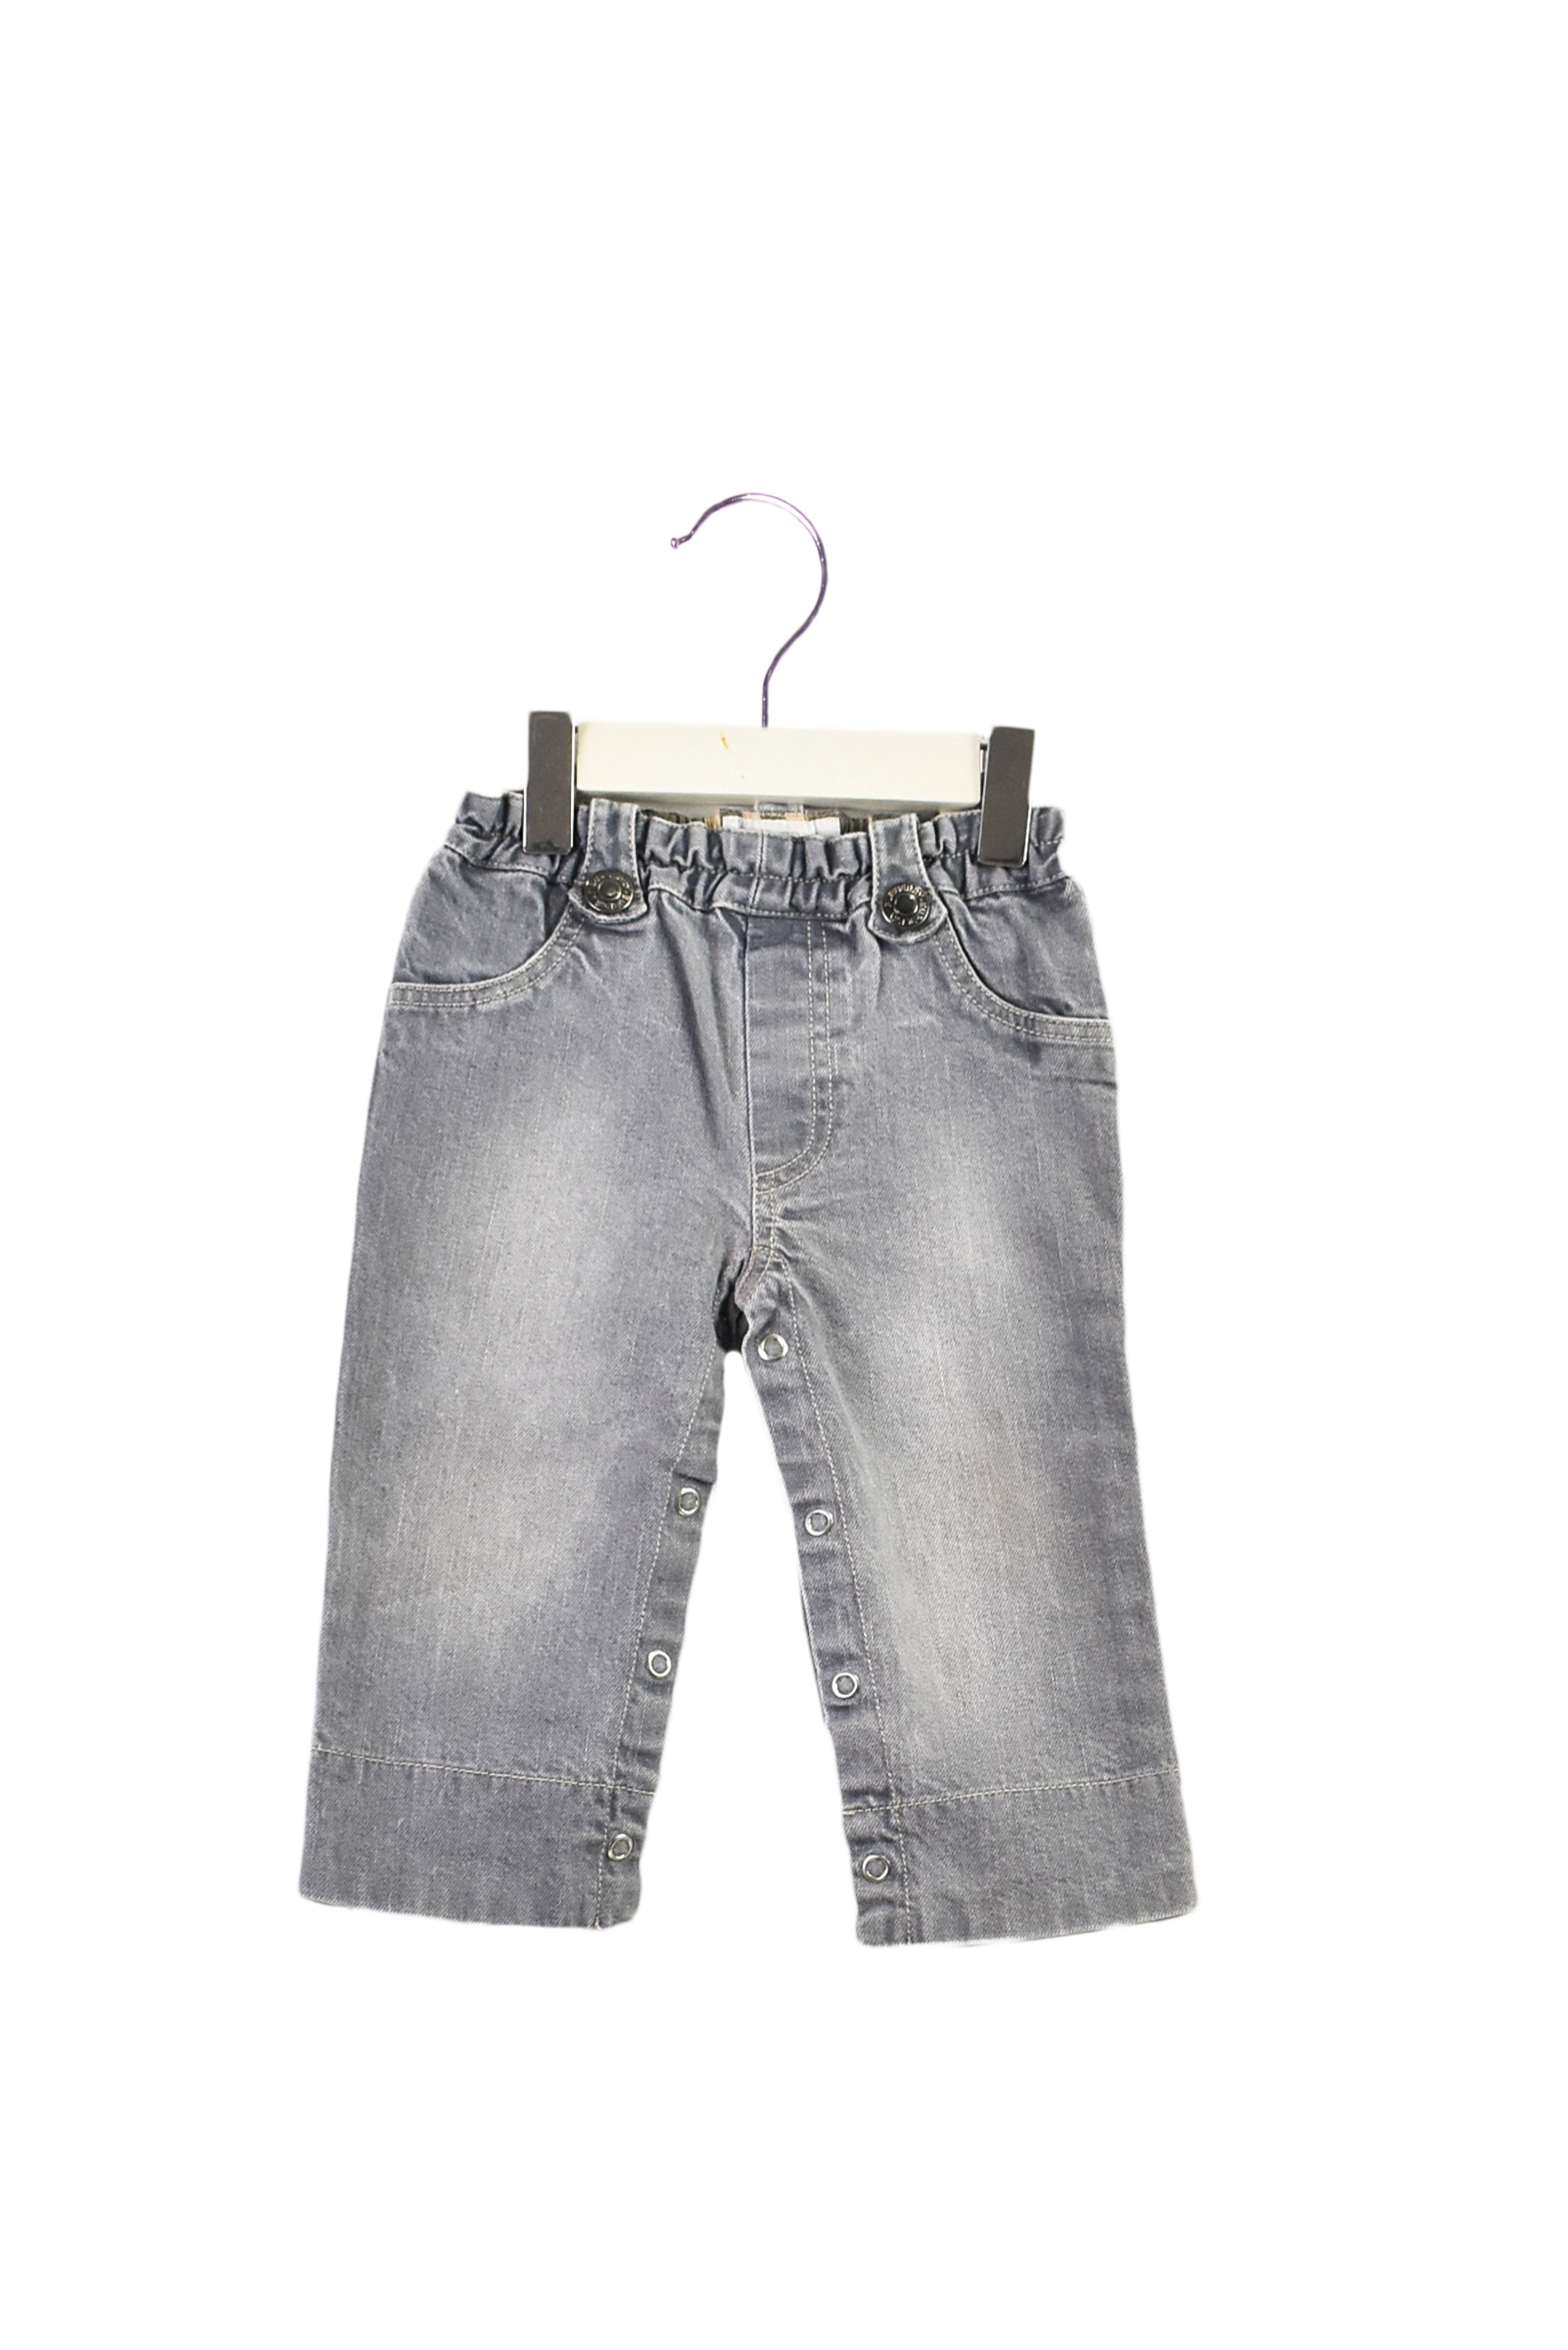 burberry baby jeans